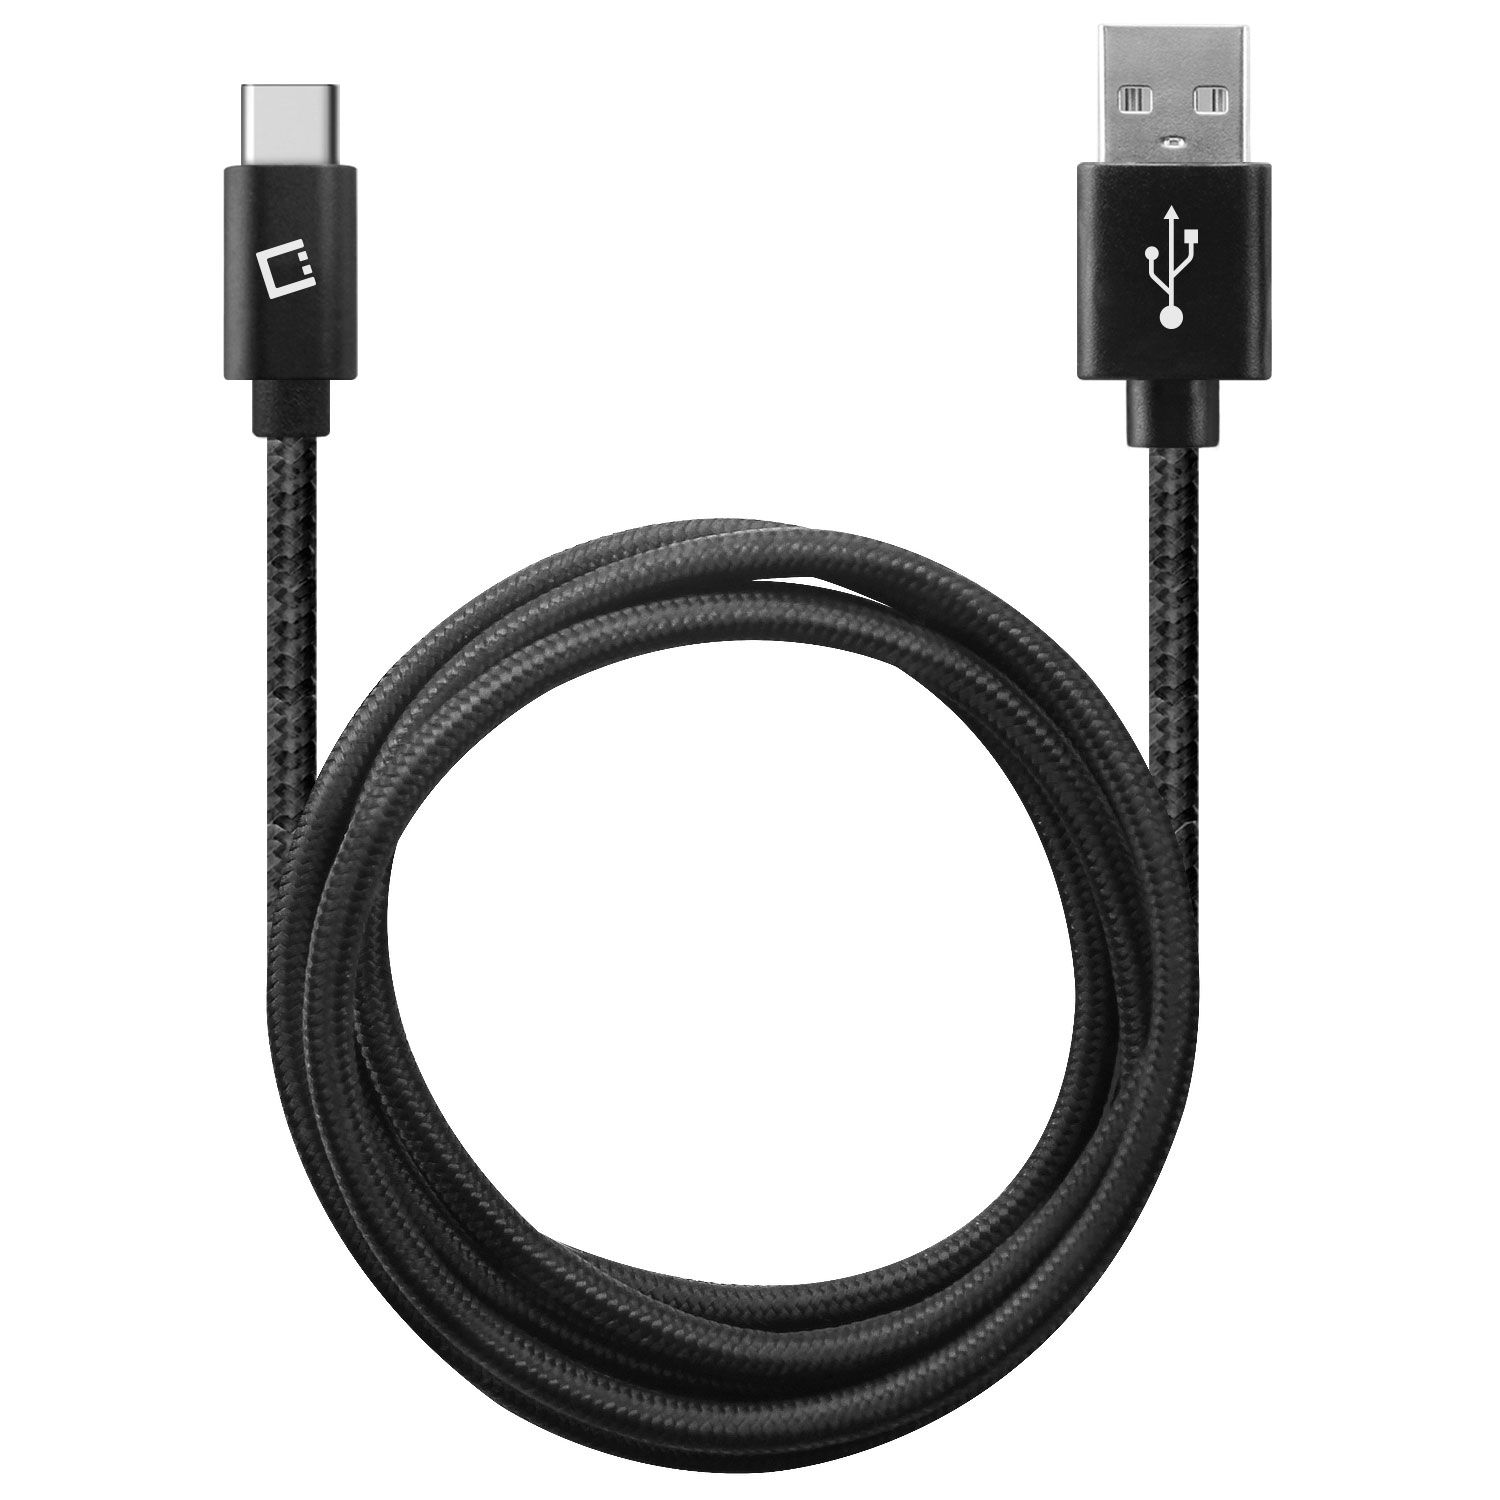 Cellet USB Cable Compatible with LG Q70, Heavy Duty Braided USB Type C (USB-C to USB-A) Fast Charging Sync Cable (4 feet/1.2 meters) and Atom Wipe - image 1 of 8